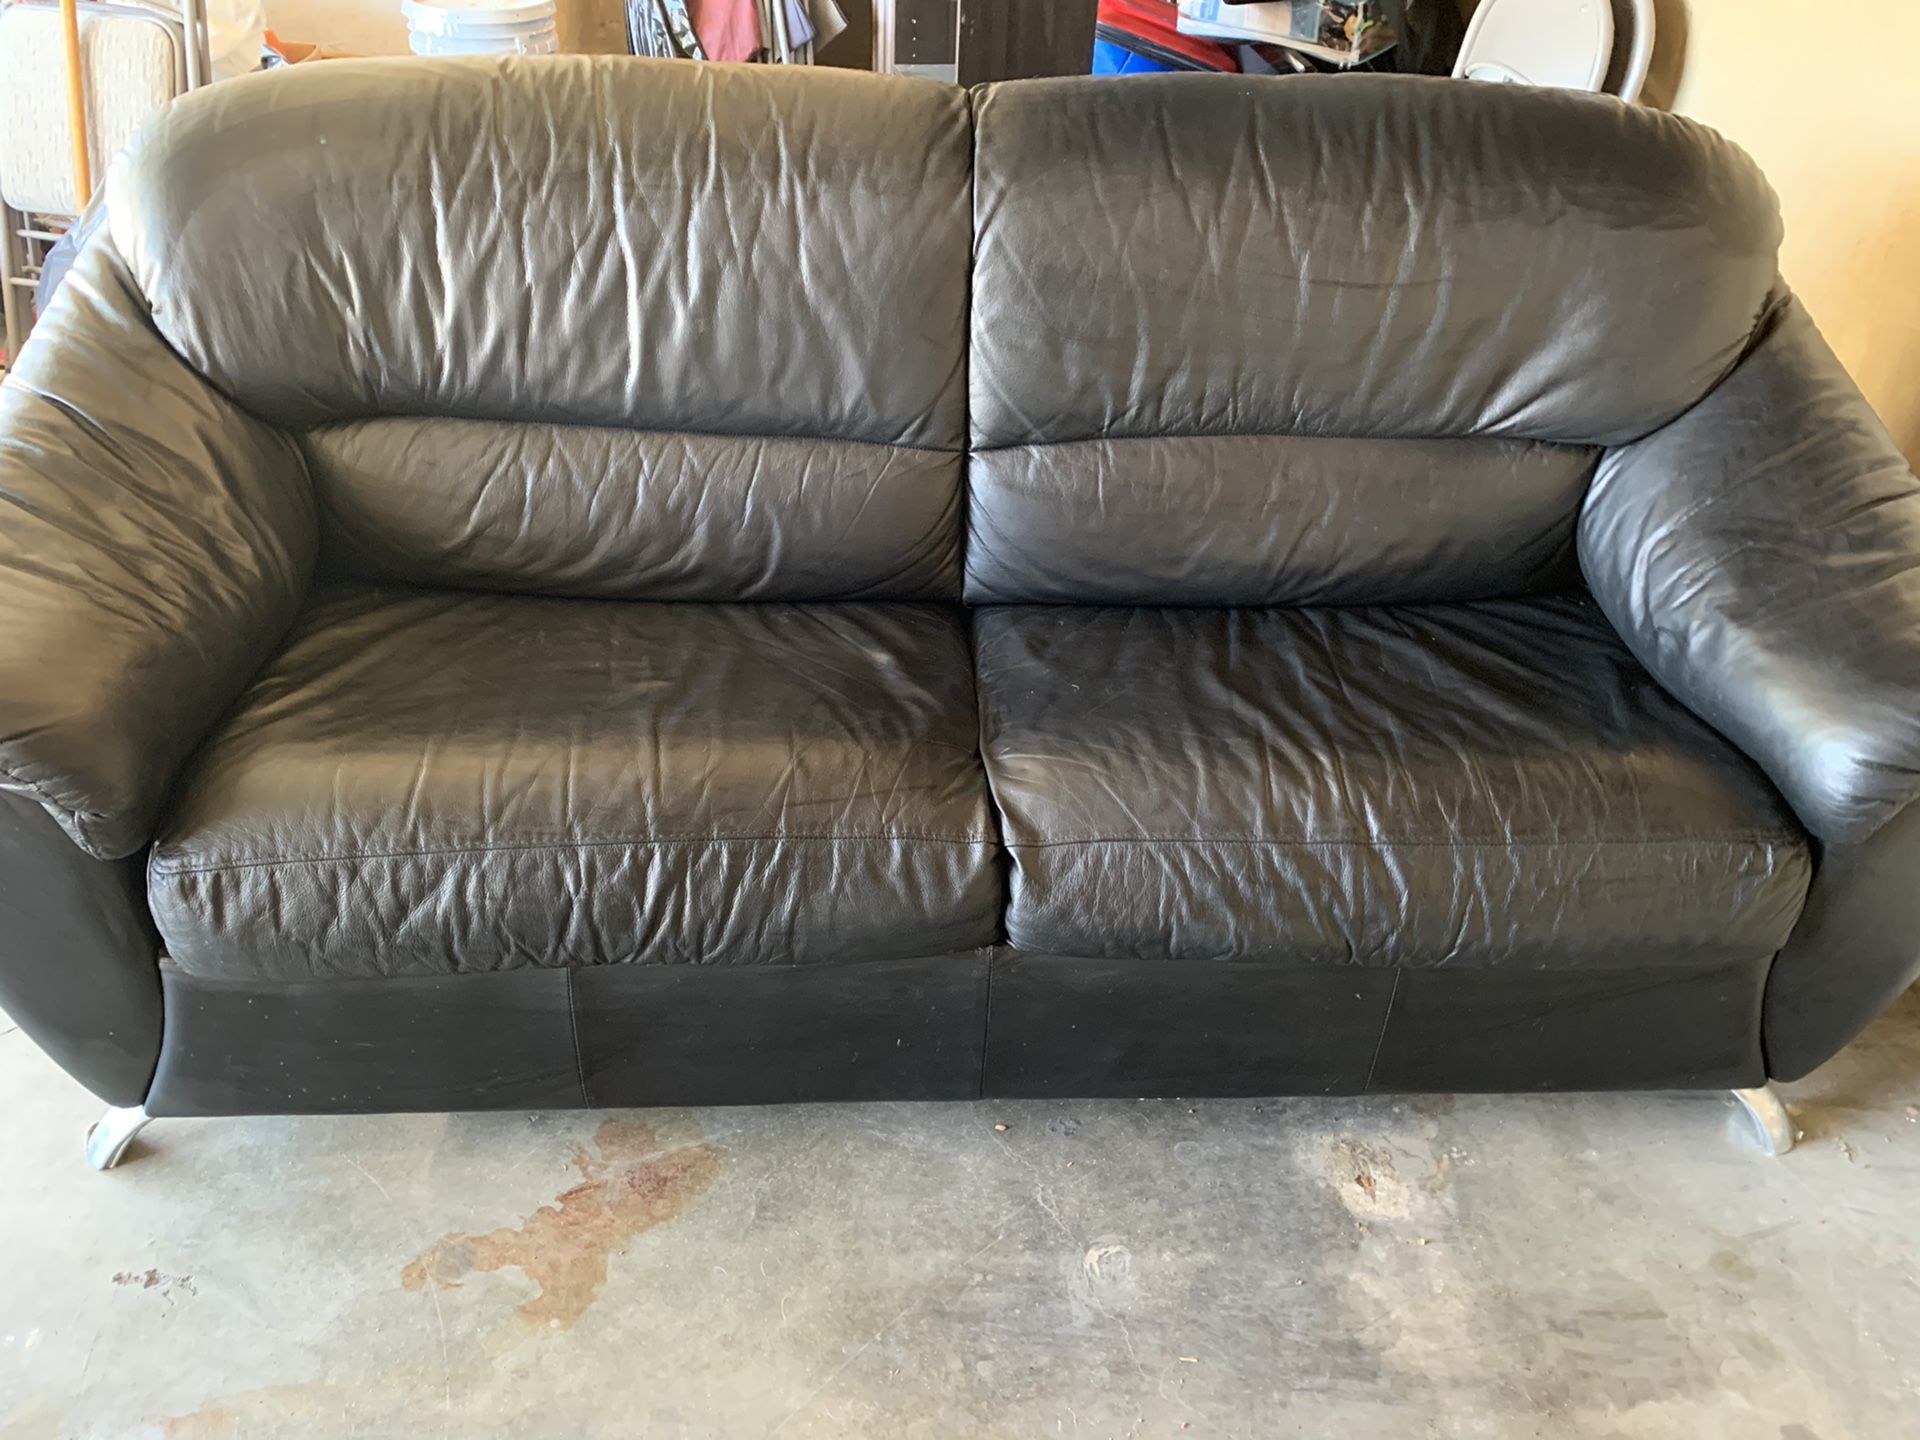 Black Leather Couch/Pullout Bed